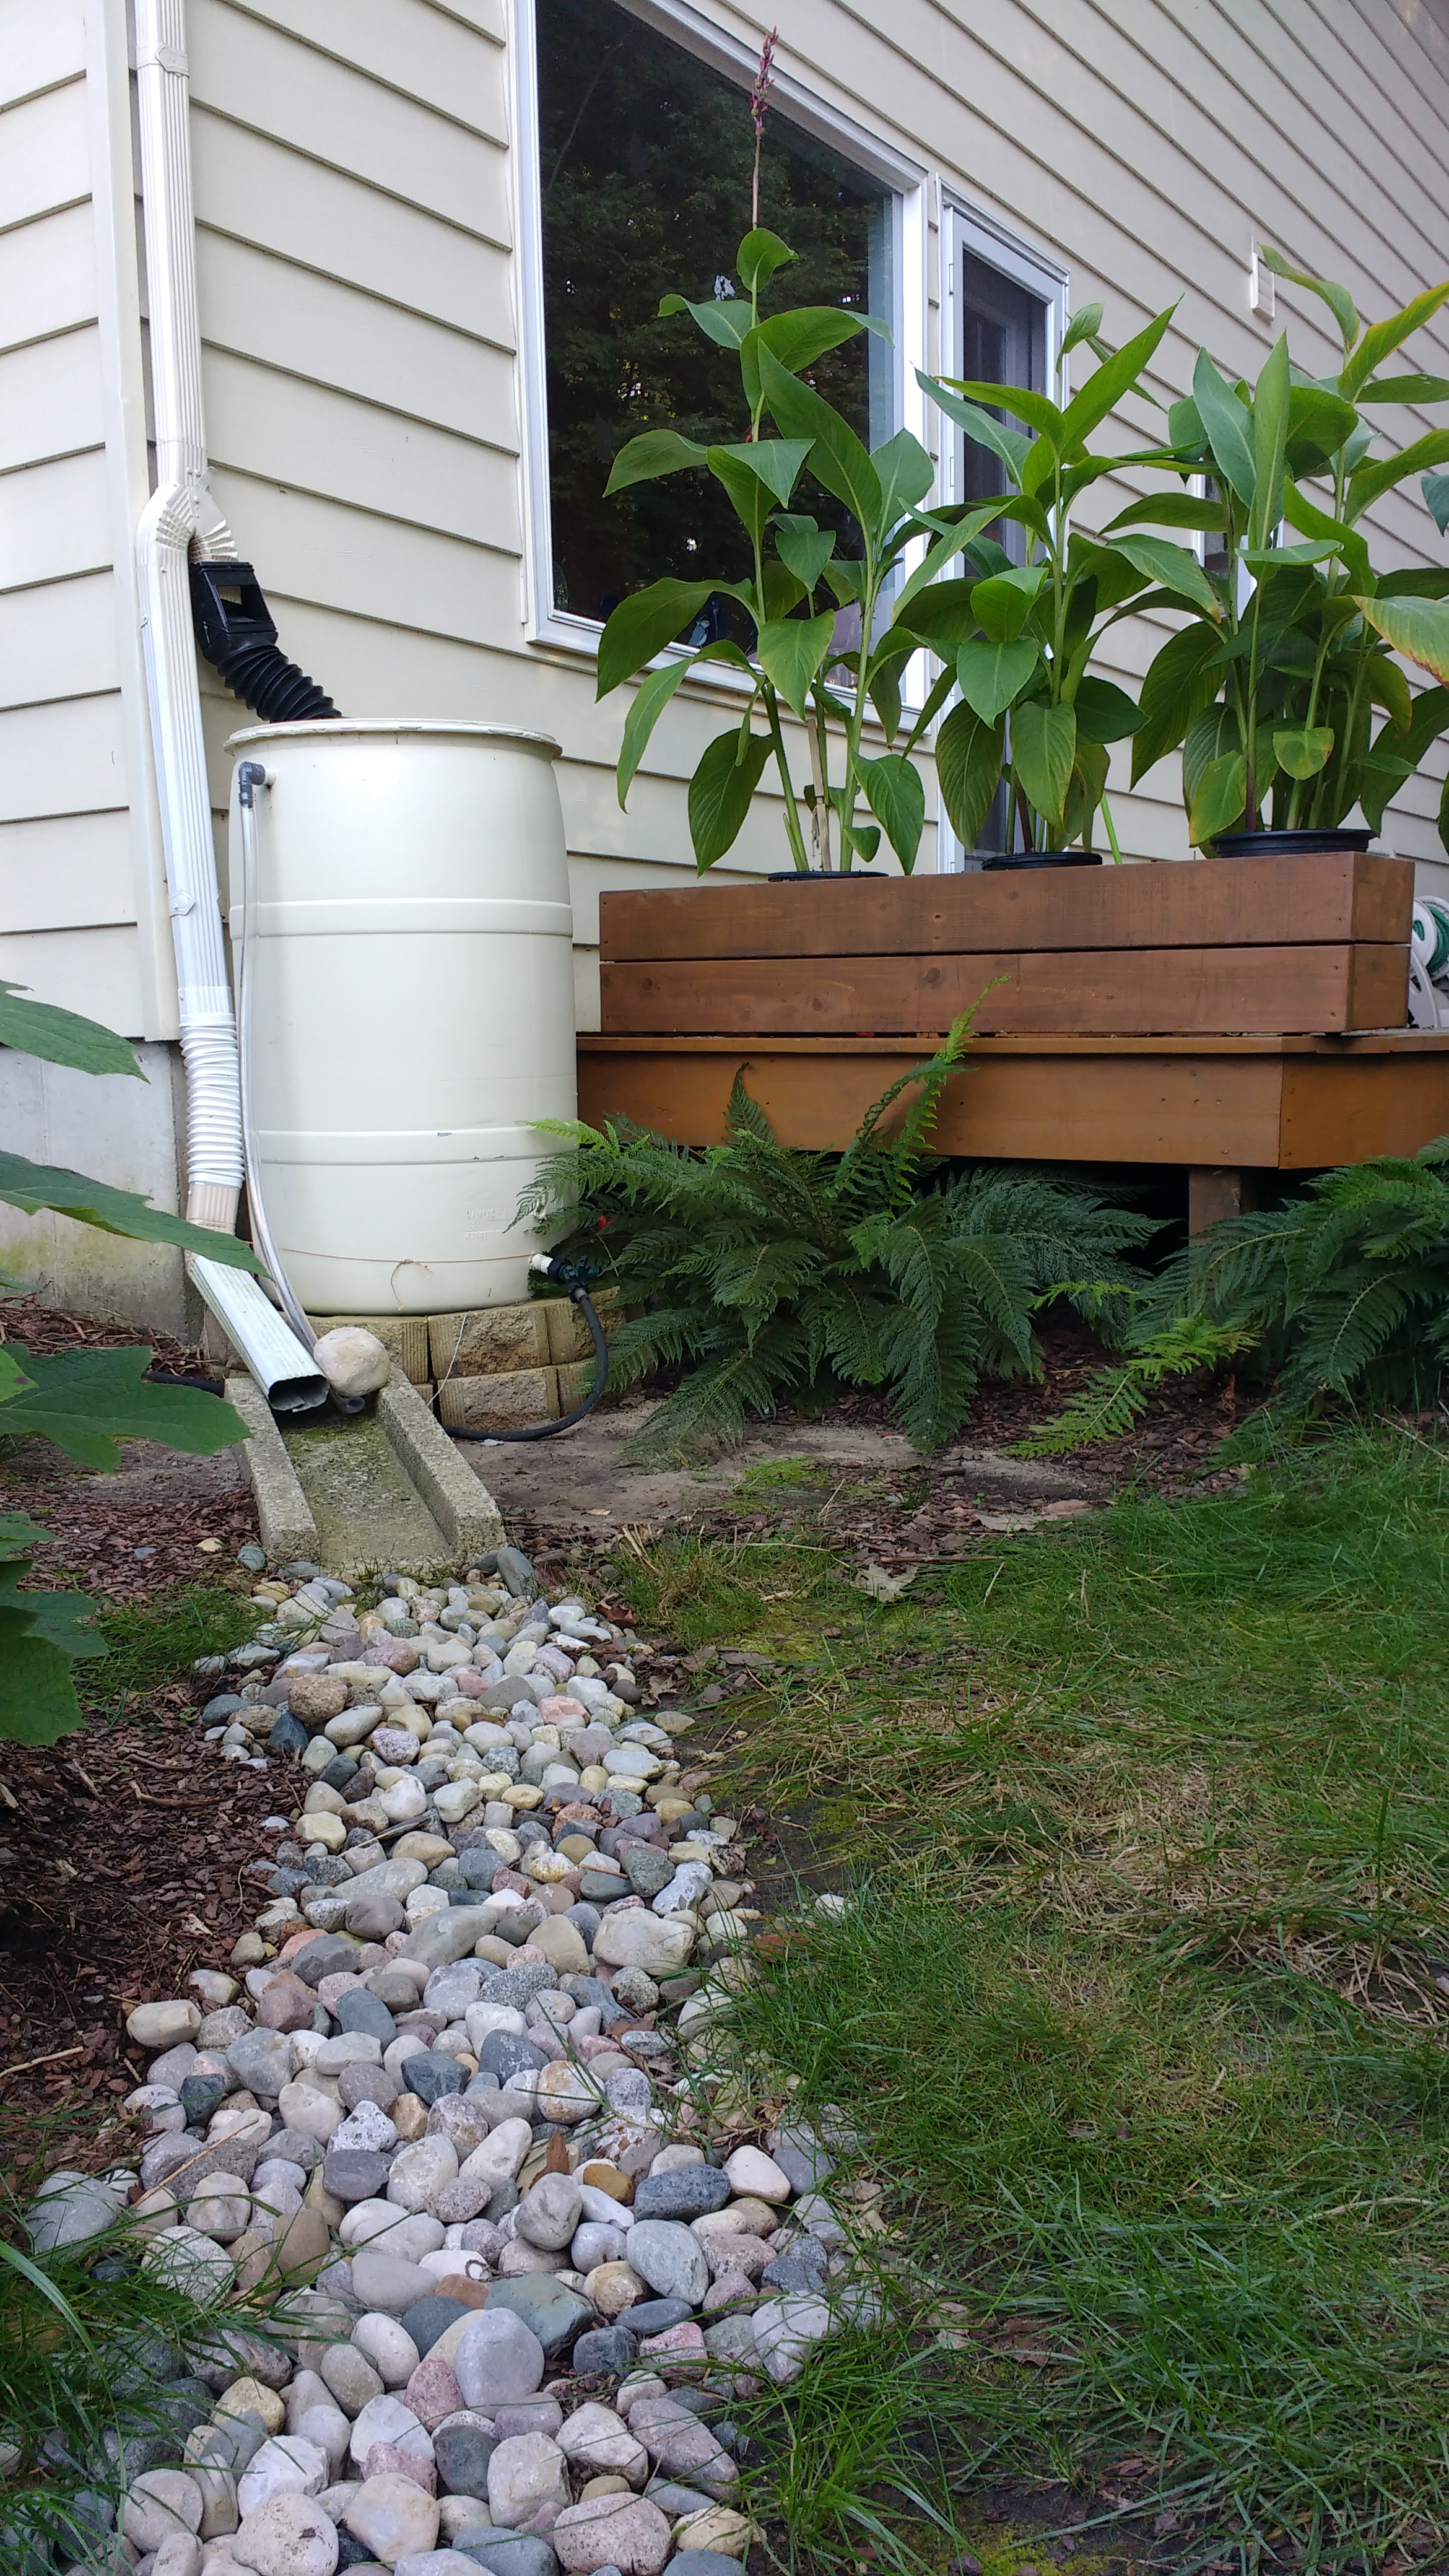 overview photo of author's rain barrel installation, select to view full-size